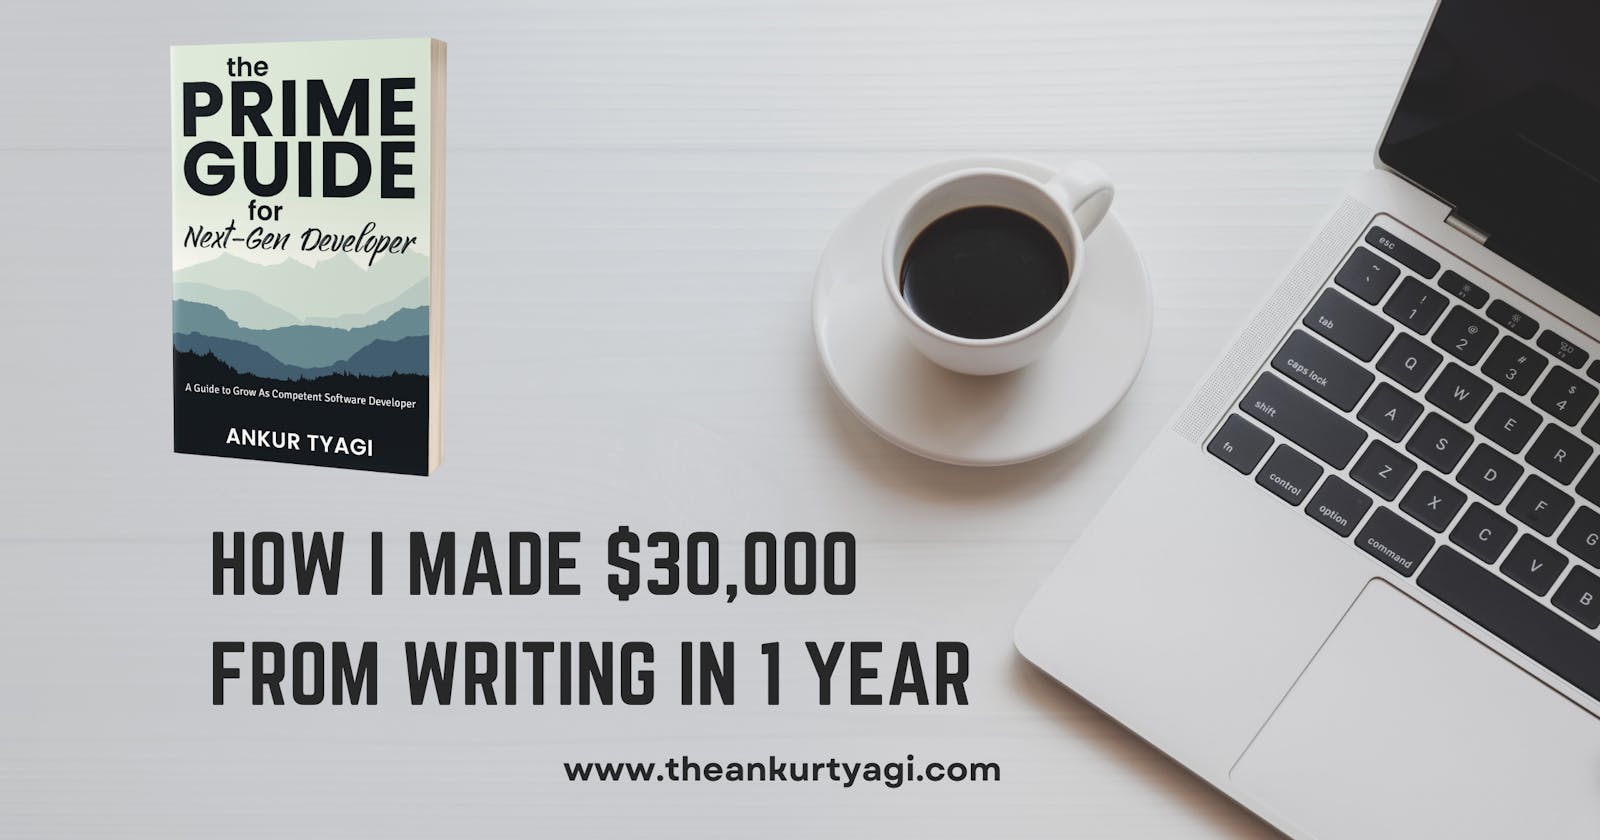 How I Made $30,000 From Writing in 1 Year